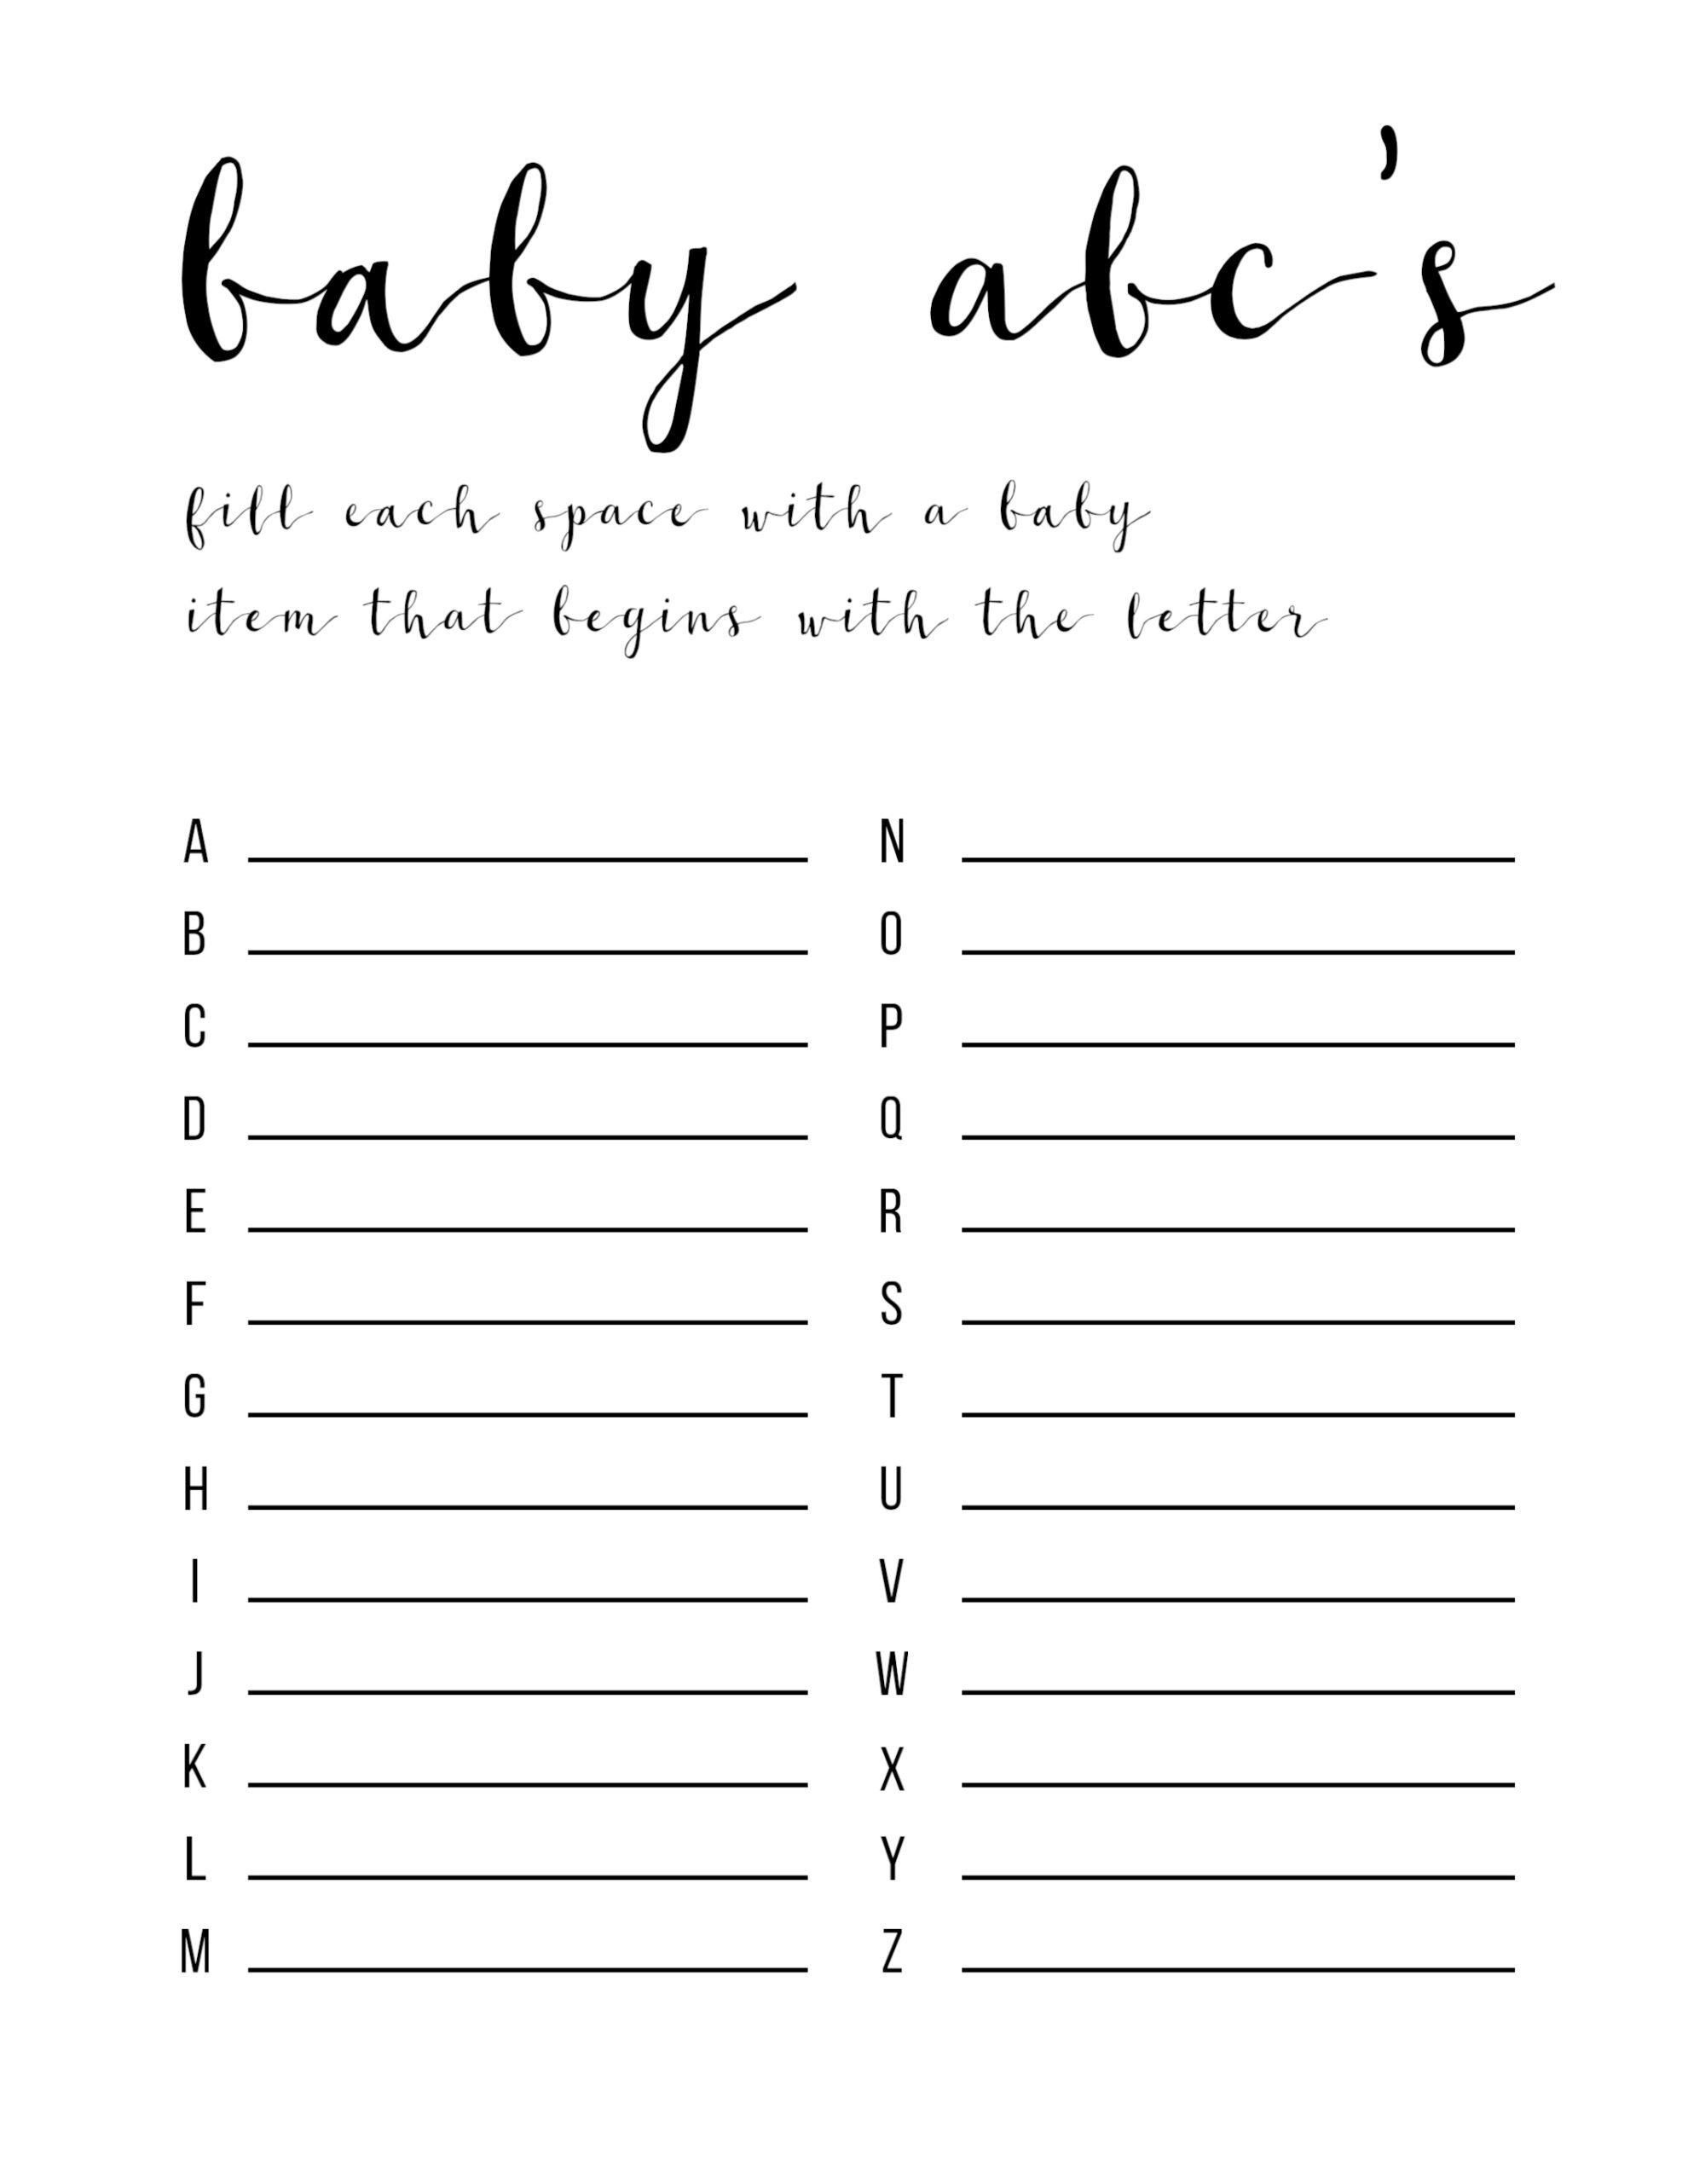 Baby Shower Games Ideas {Abc Game Free Printable} - Paper Trail Design - Free Printable Templates For Baby Shower Games